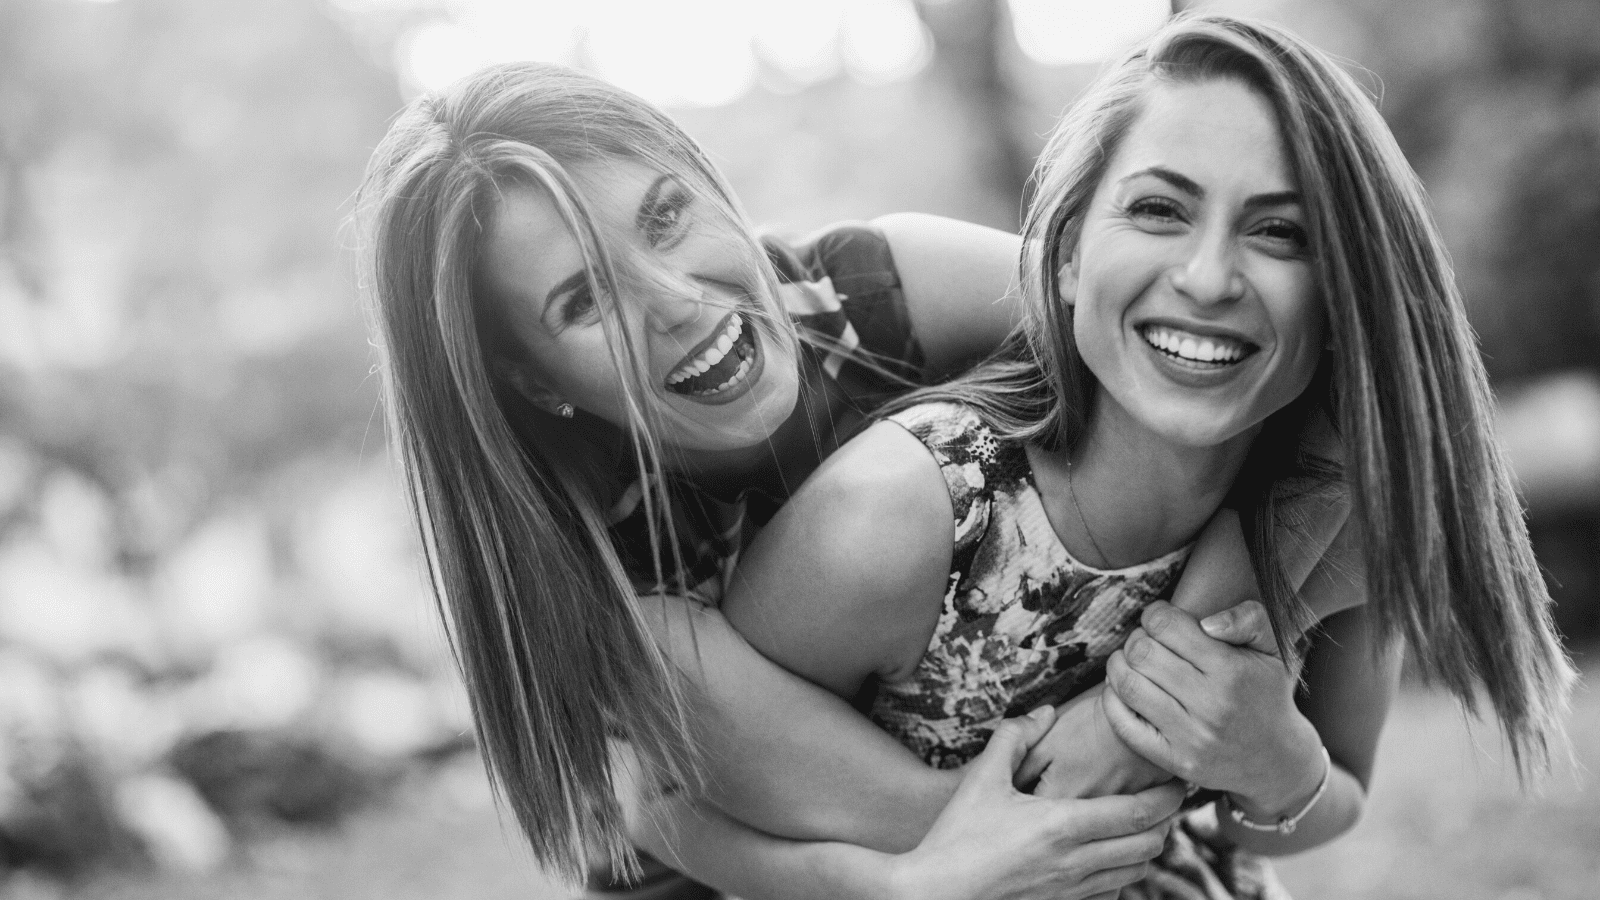 18 Things to Say to Be a More Supportive Friend